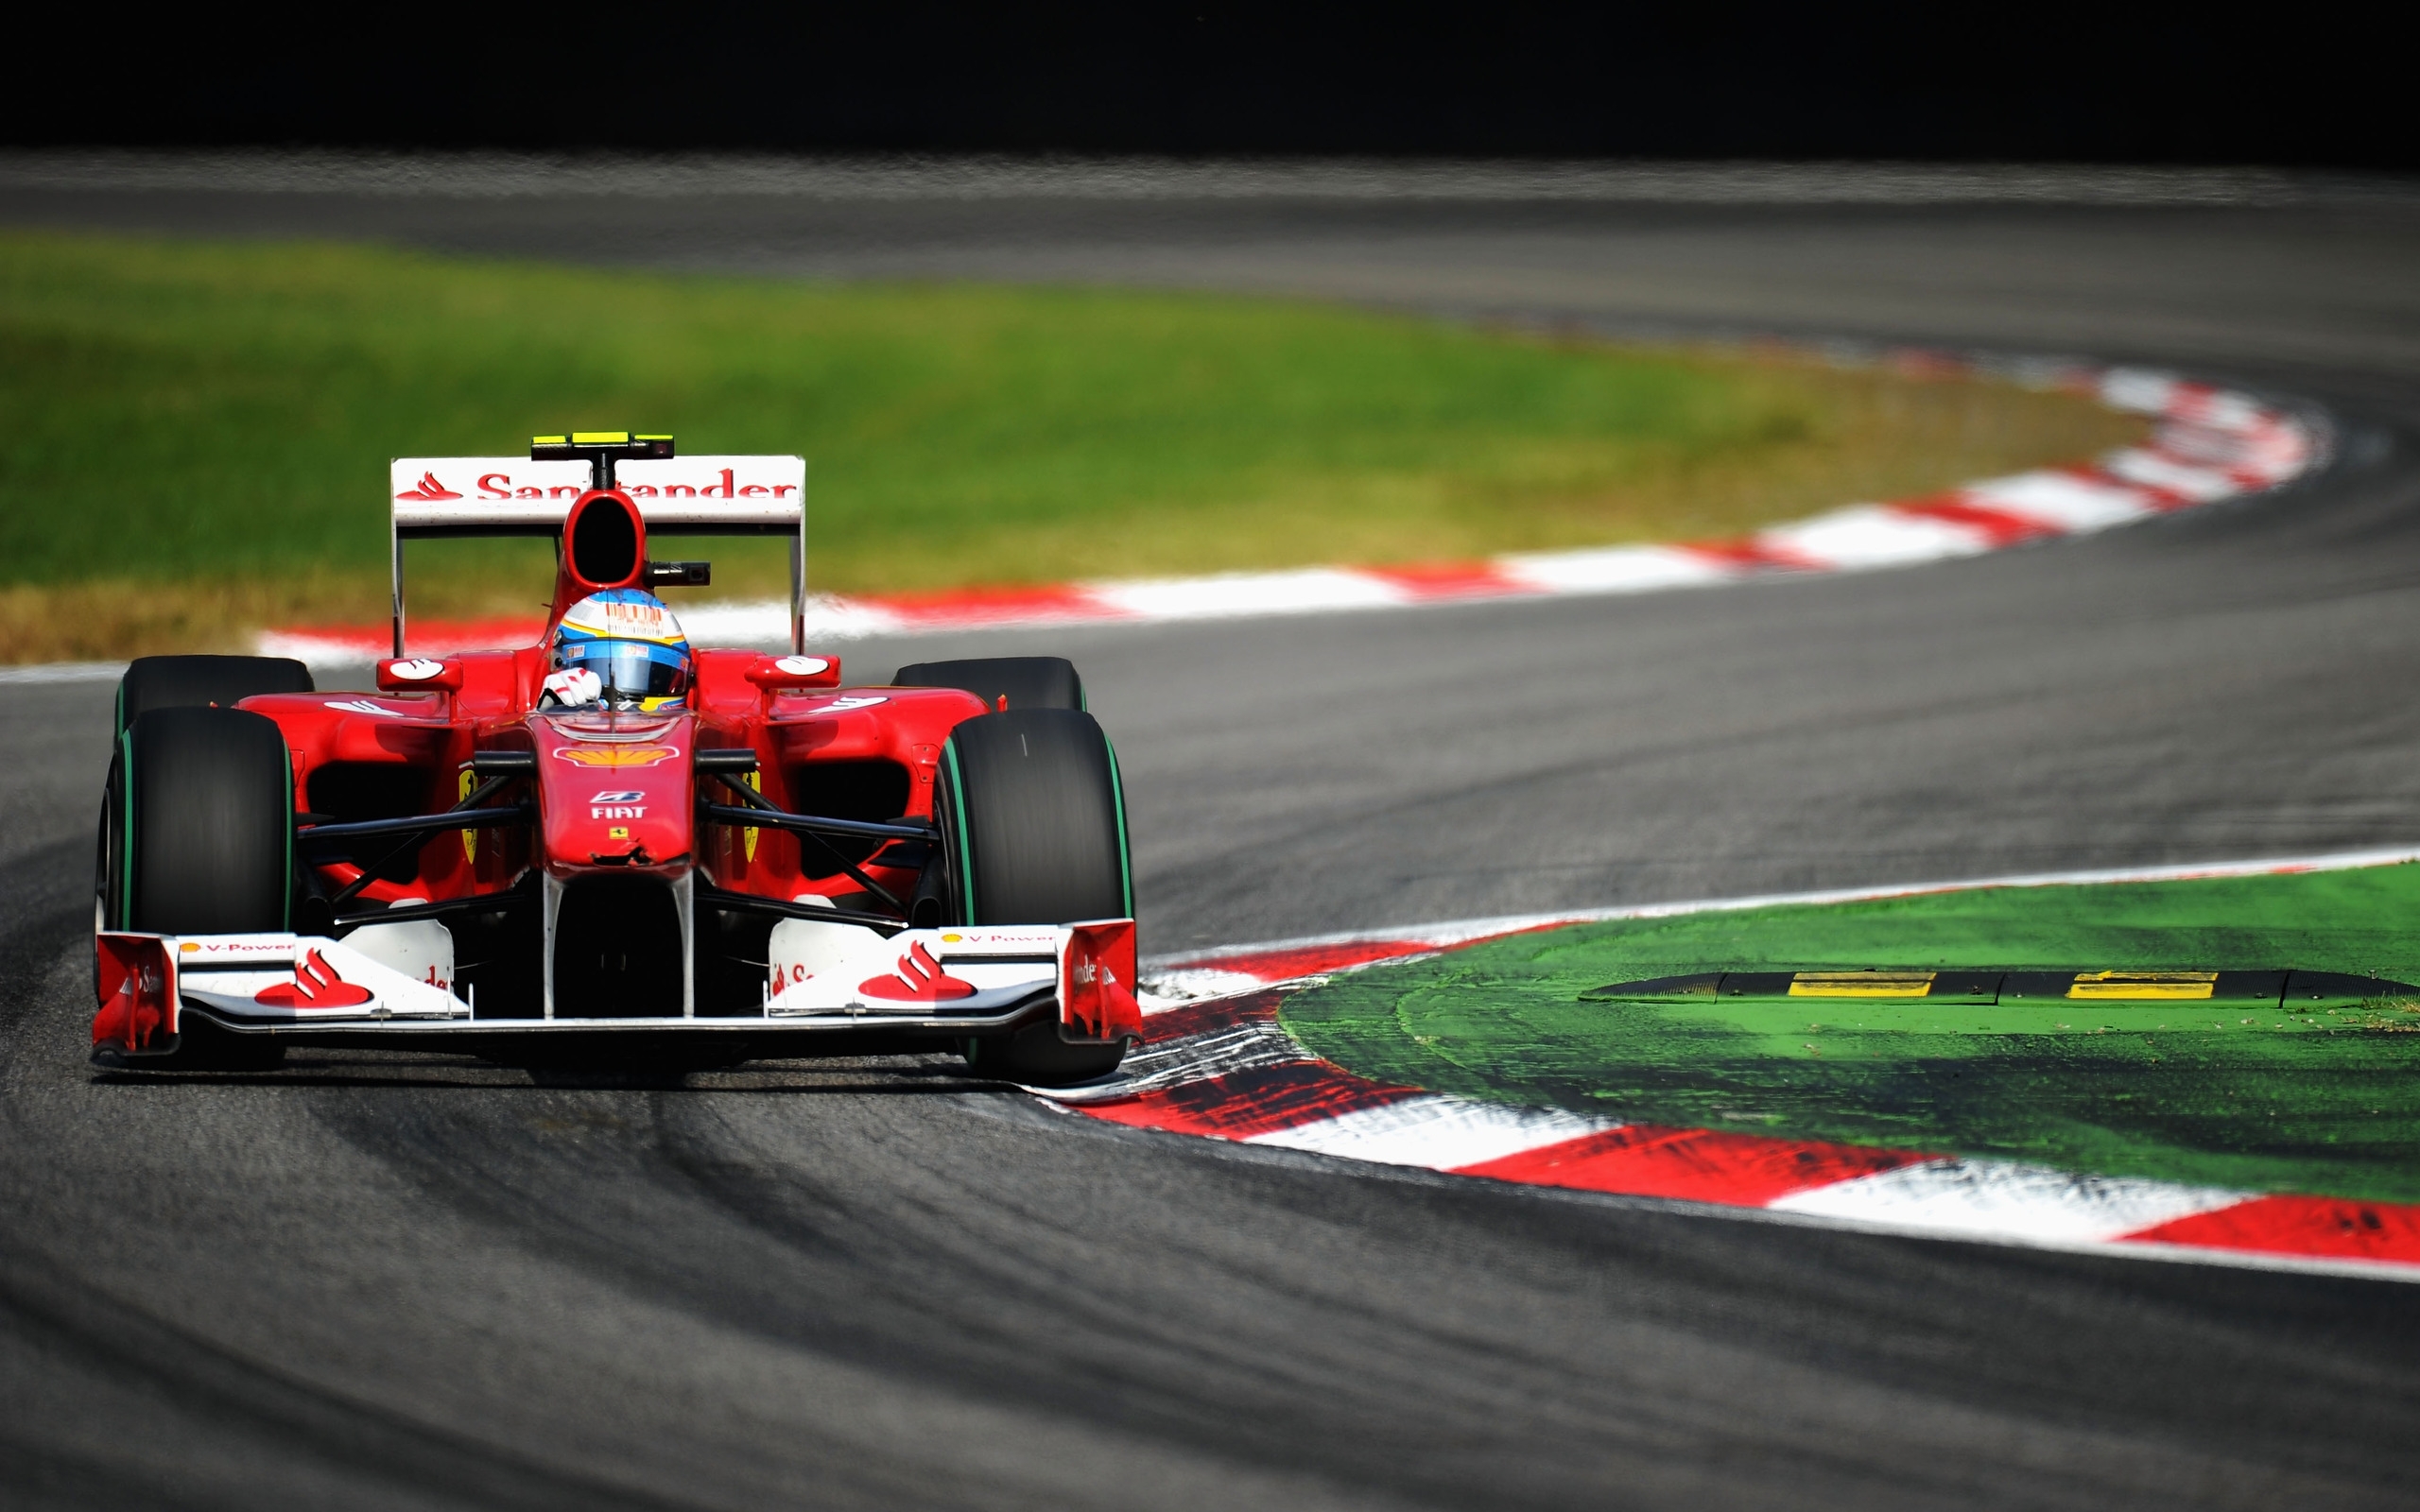 Formula 1 F1 wallpaper for desktop, download free Formula 1 F1 picture and background for PC